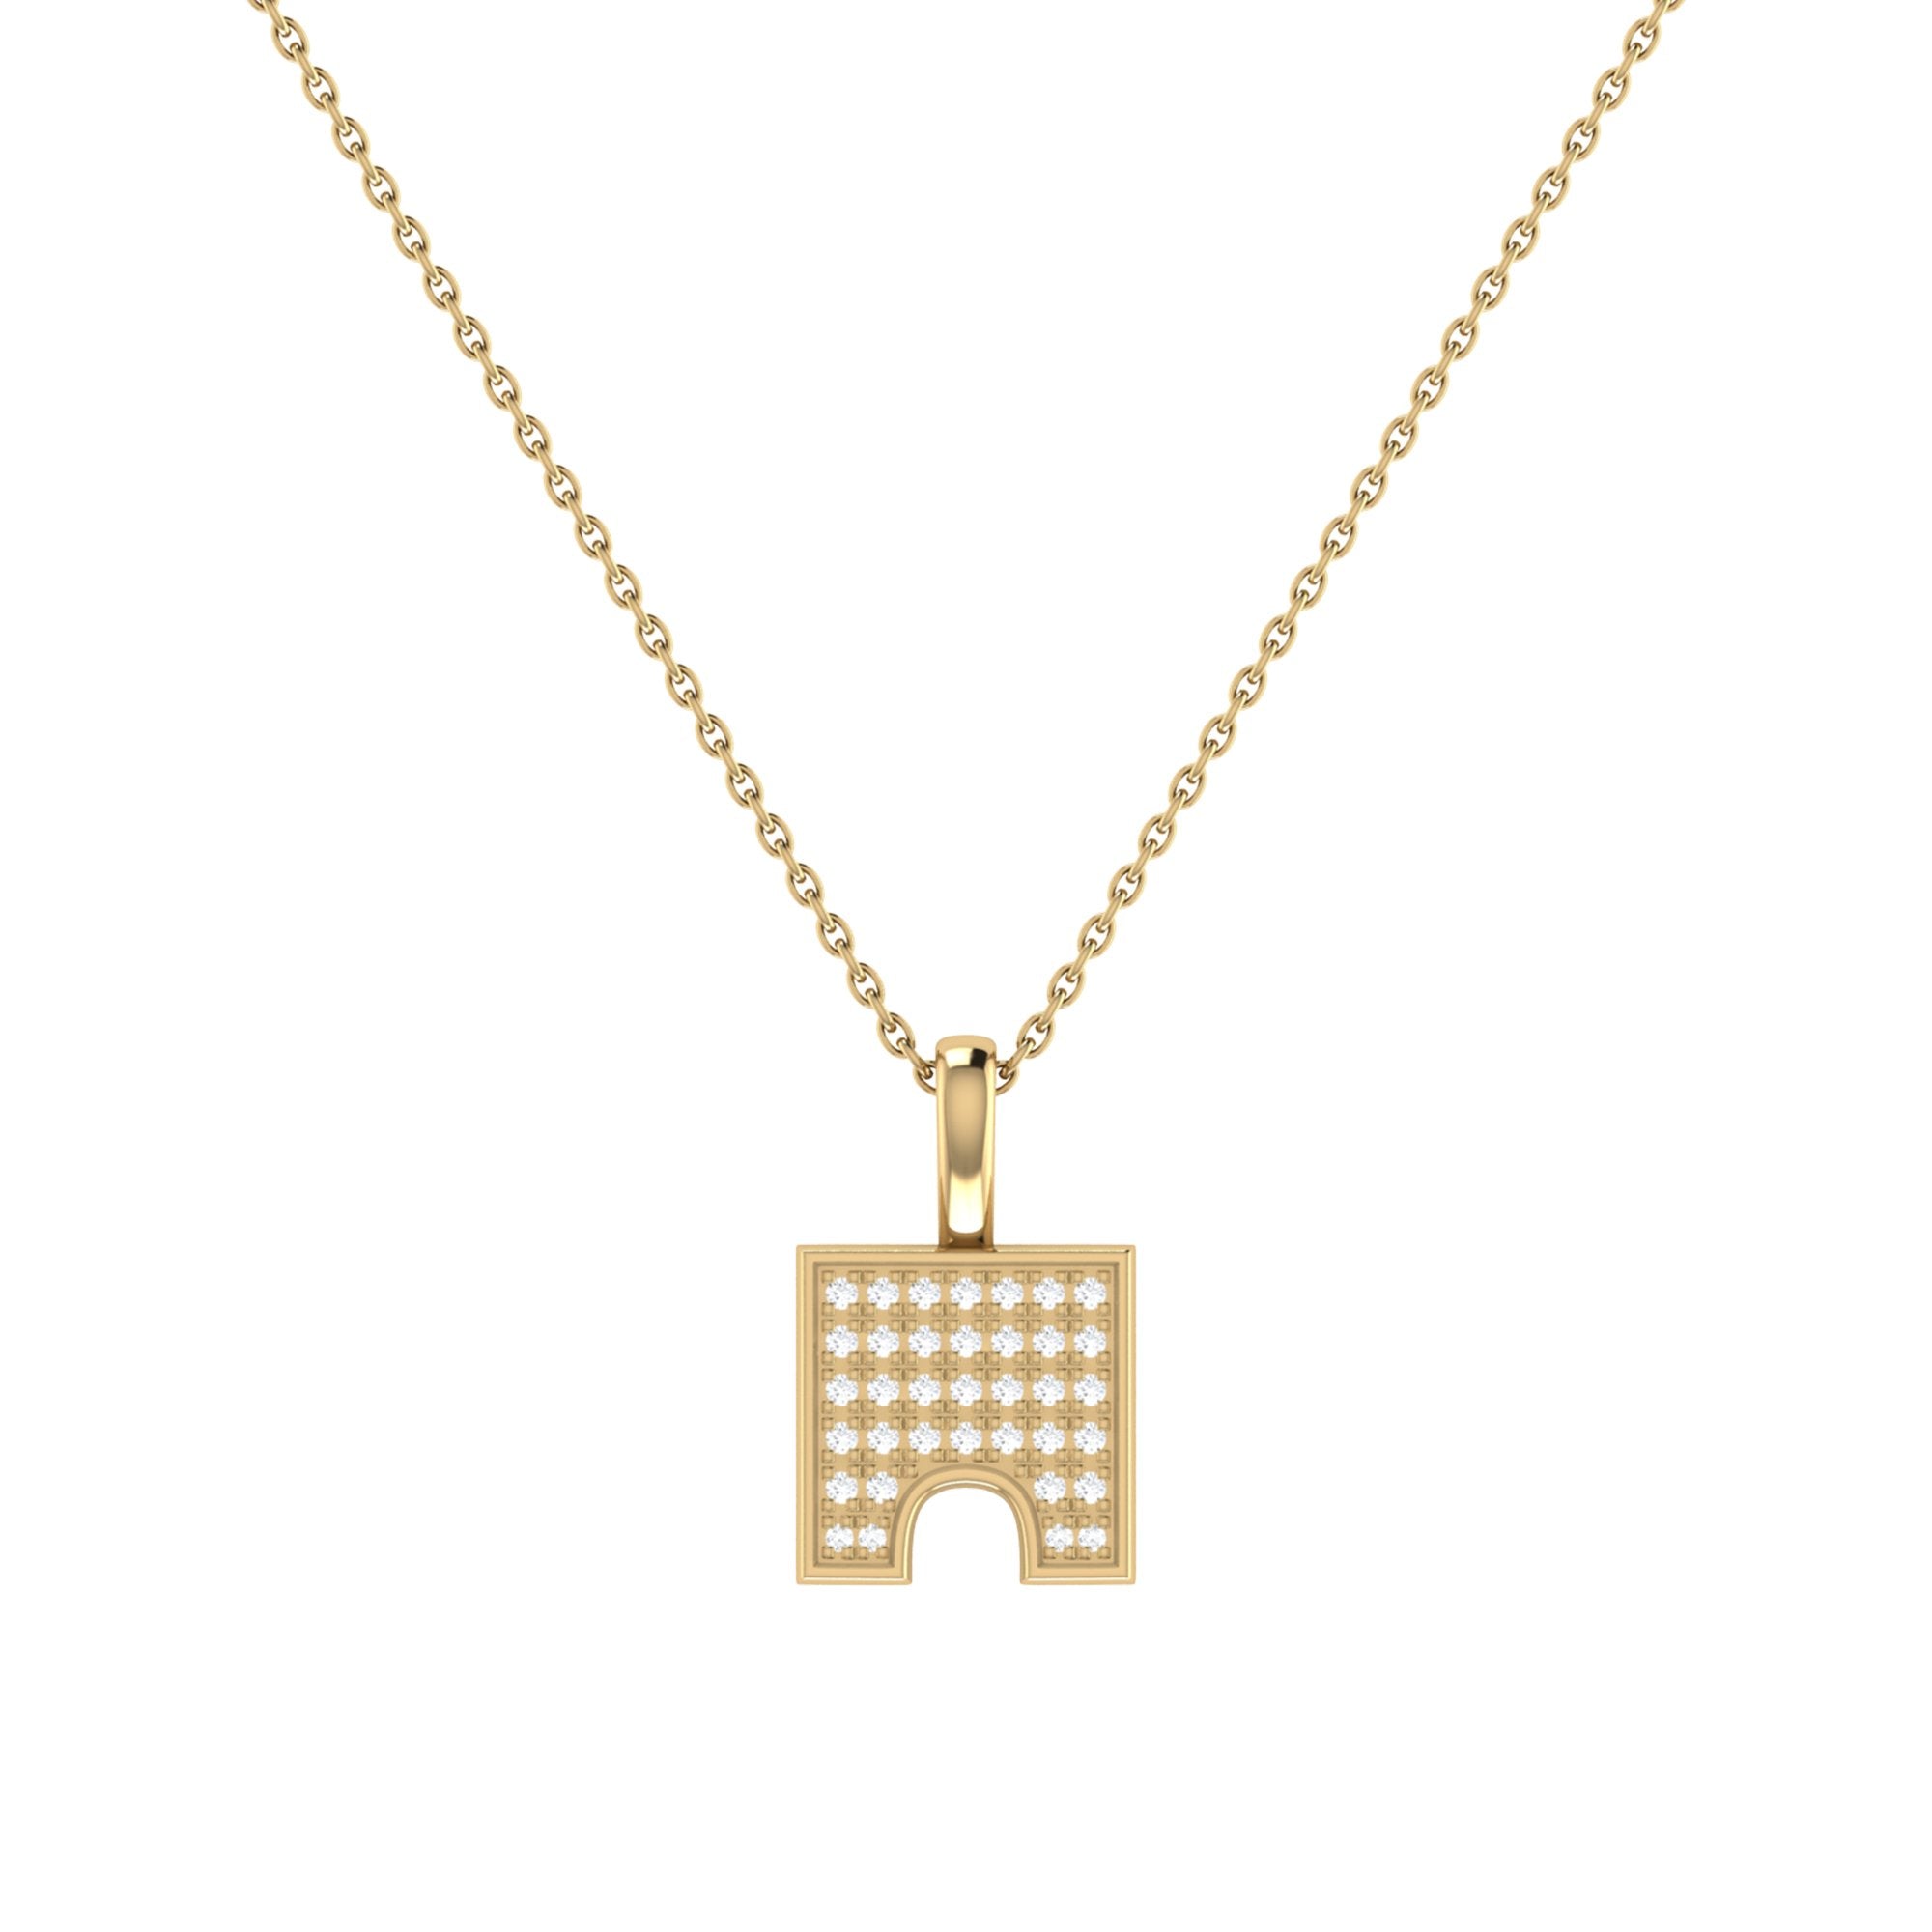 Elegant City Arches Diamond Pendant in 14K Yellow Gold - 100% Natural Diamonds, Micro Pave Setting, 18" Cable Chain Bijou Her